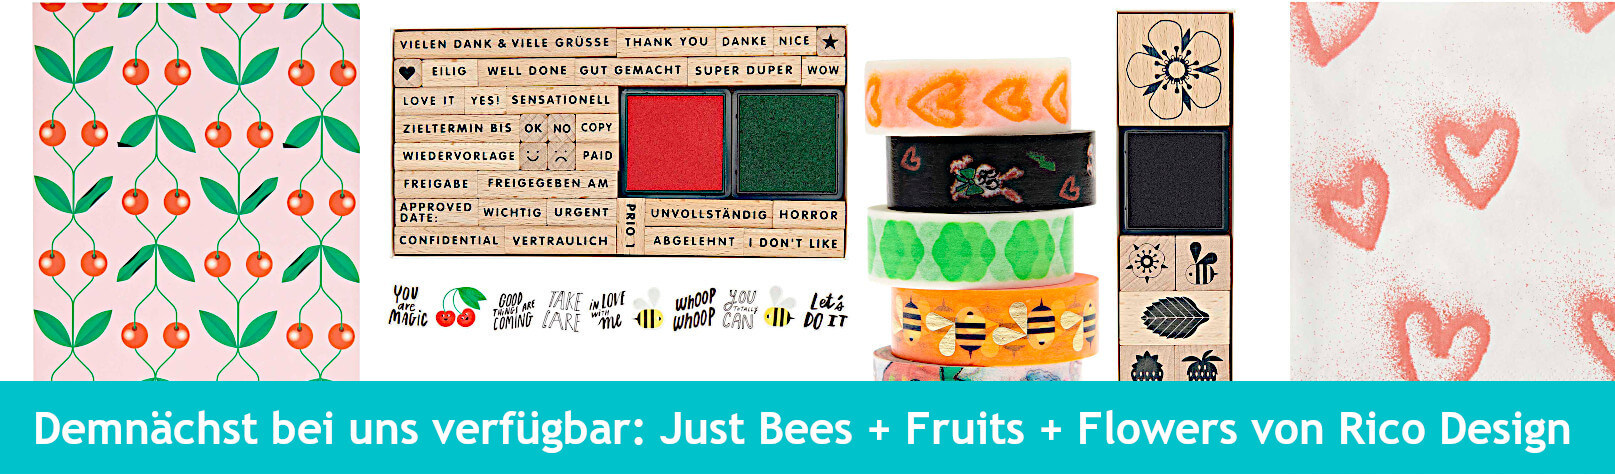 Just Bees + Fruits + Flowers